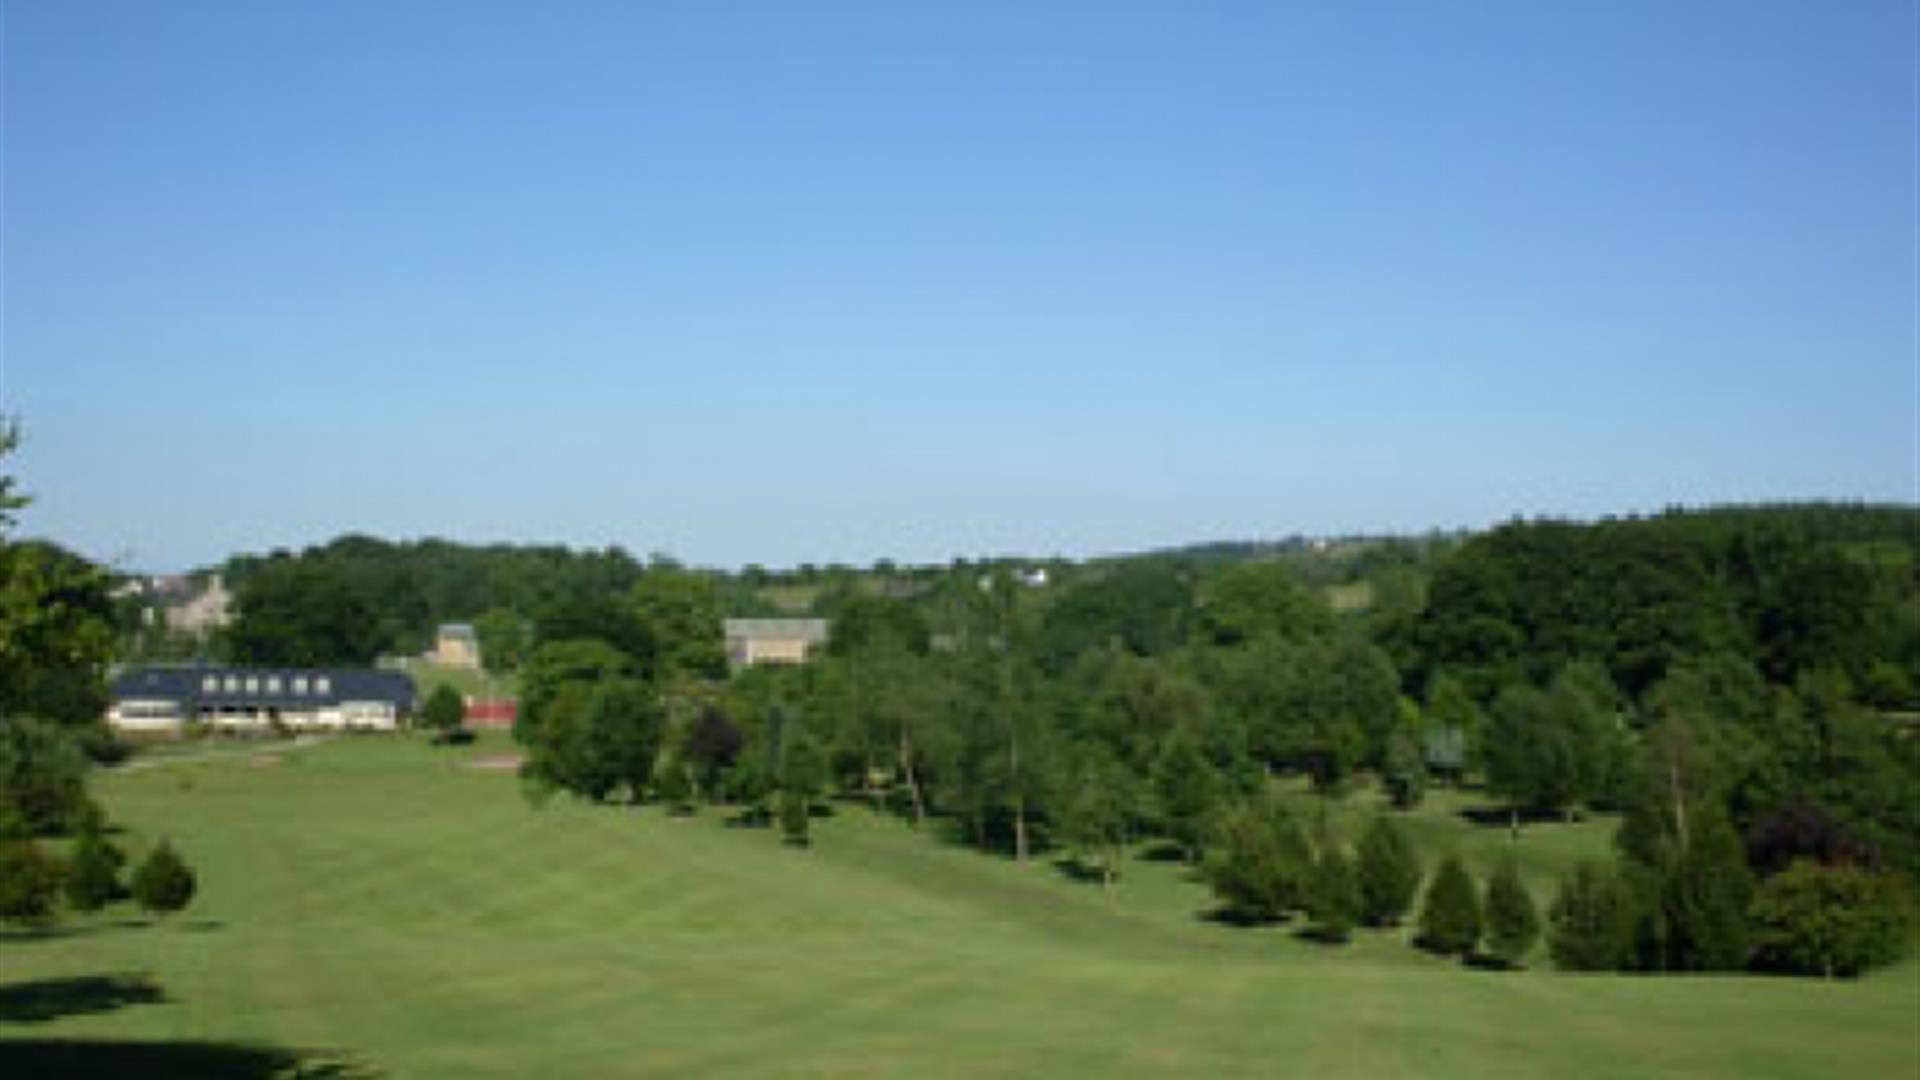 Image of part of the course and the sky